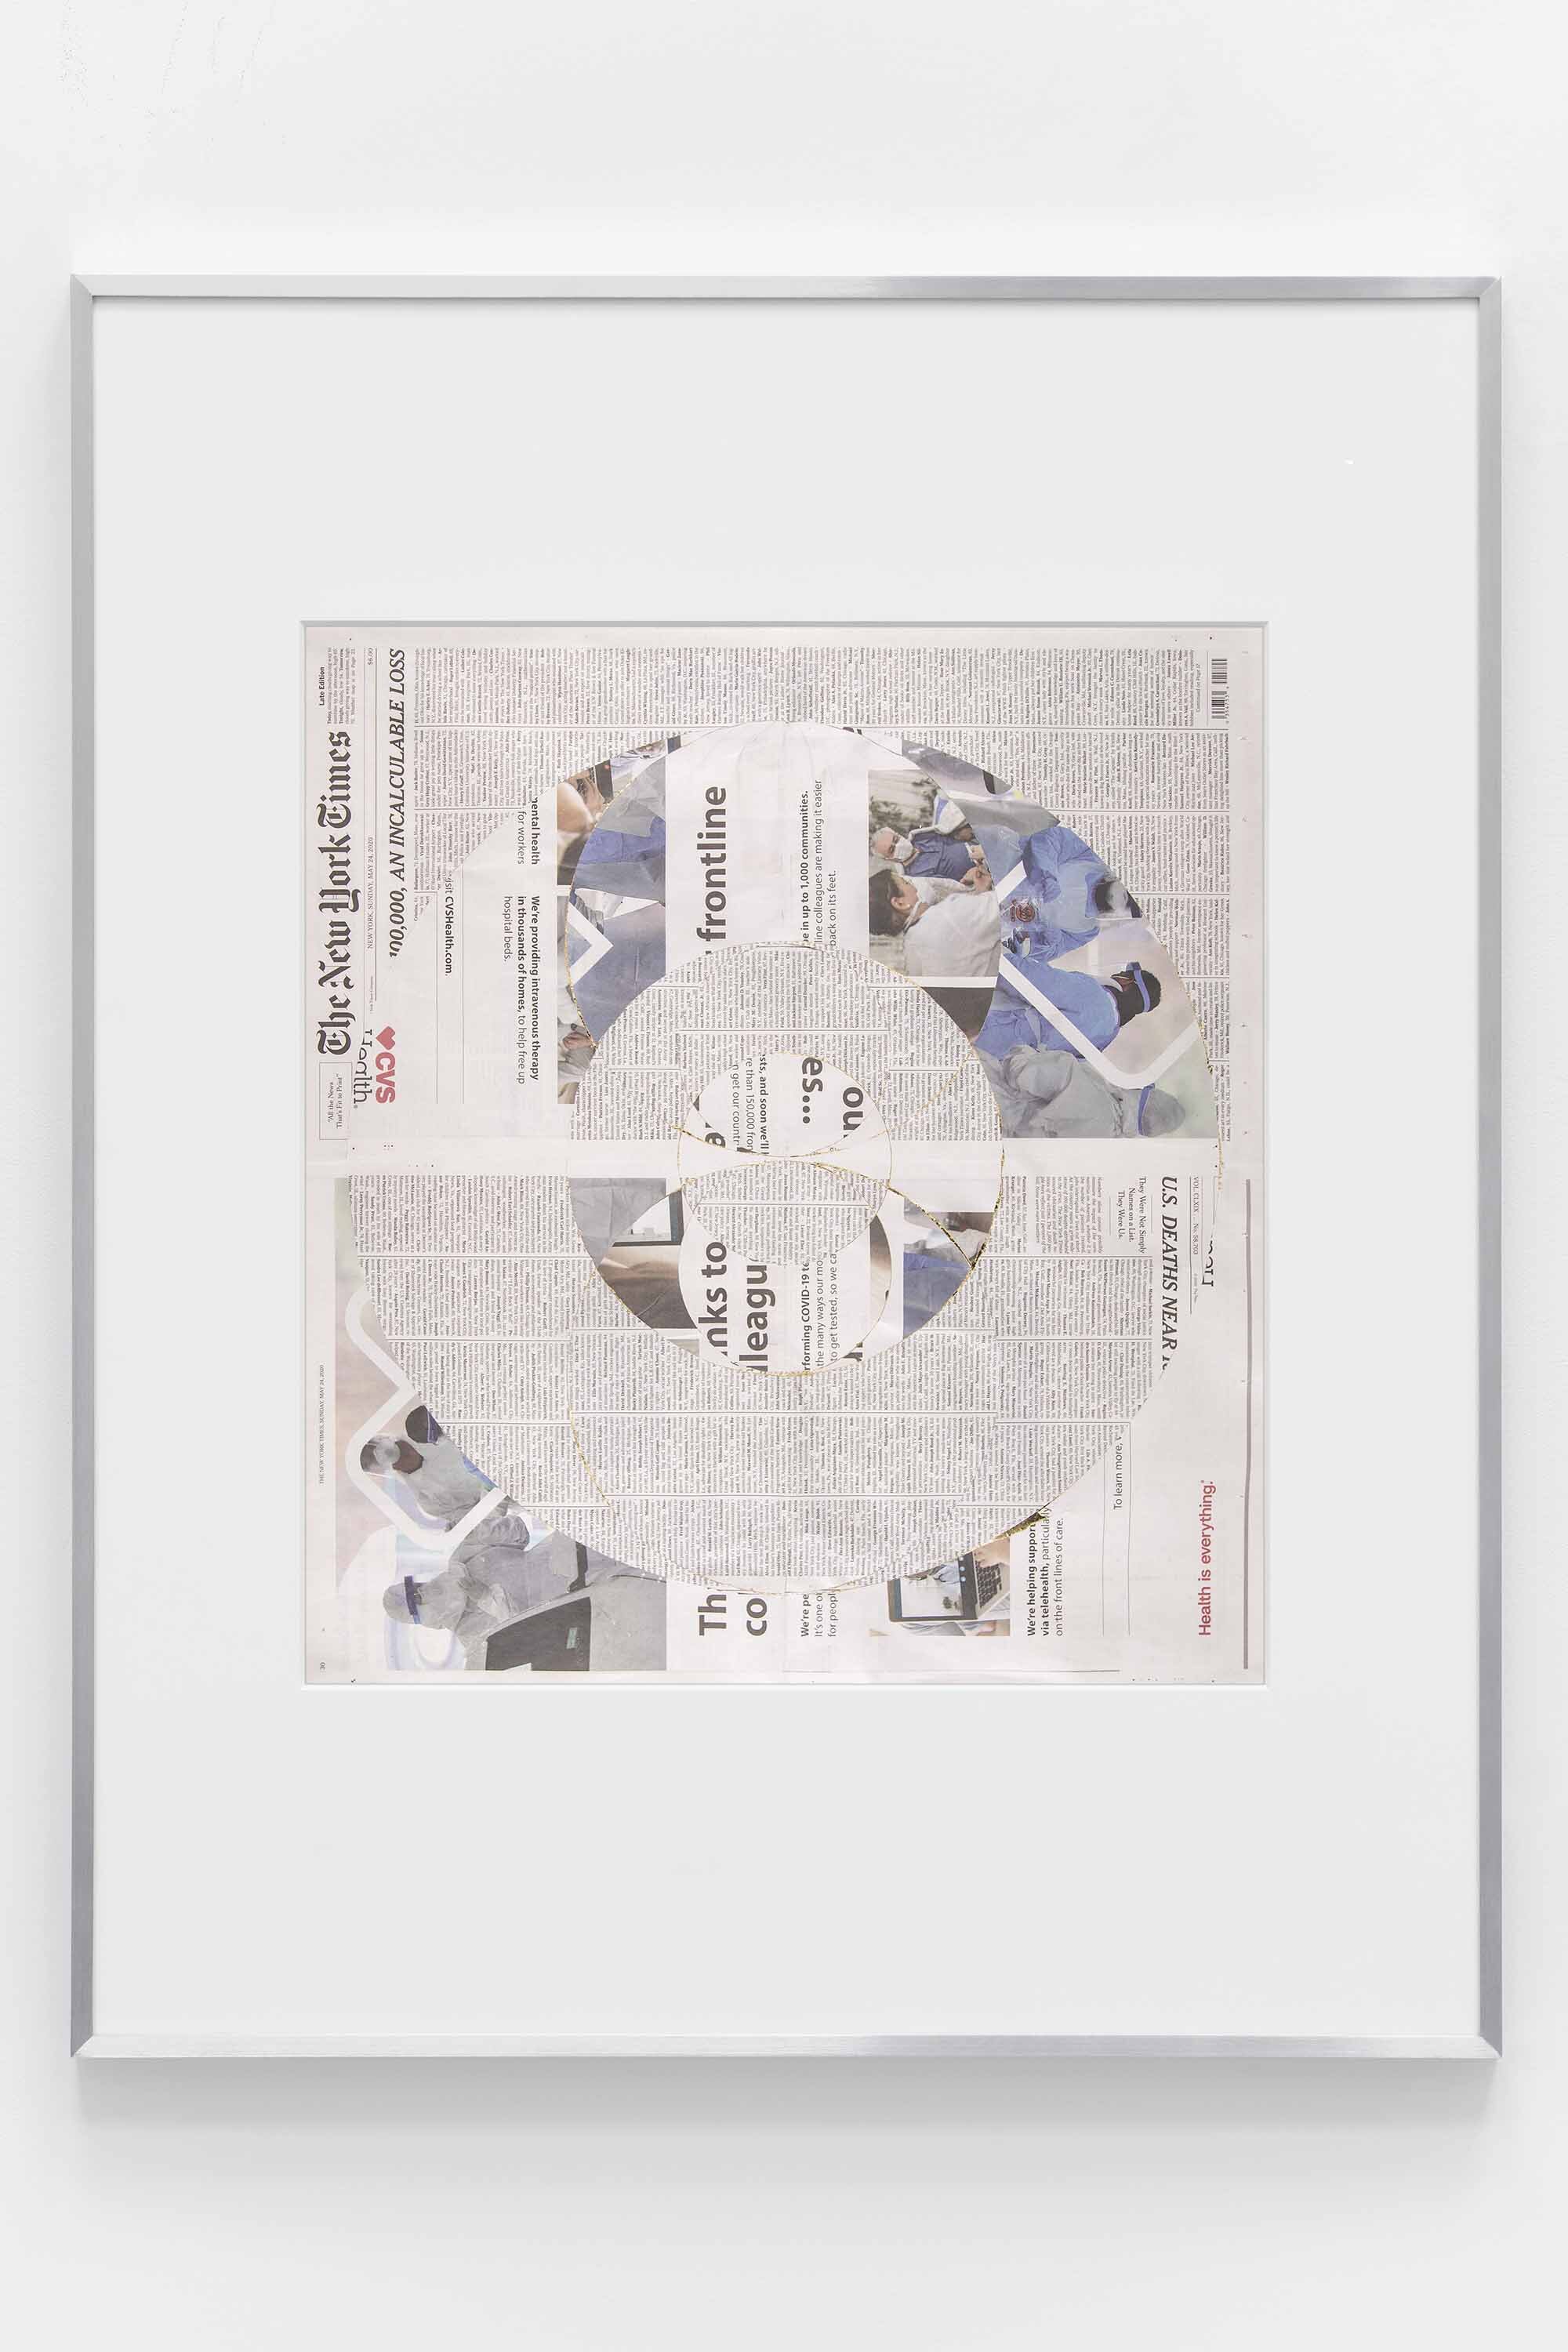   Blind Collage (Seven 180º Rotations, The New York Times: New York City, New York, Sunday, May 24, 2020)   2021  Newspaper, tape, and 22 karat gold leaf  39 1/8 x 31 1/4 inches   Blind Collages, 2017–   Exhibition:   Foreign Correspondence, 2021  